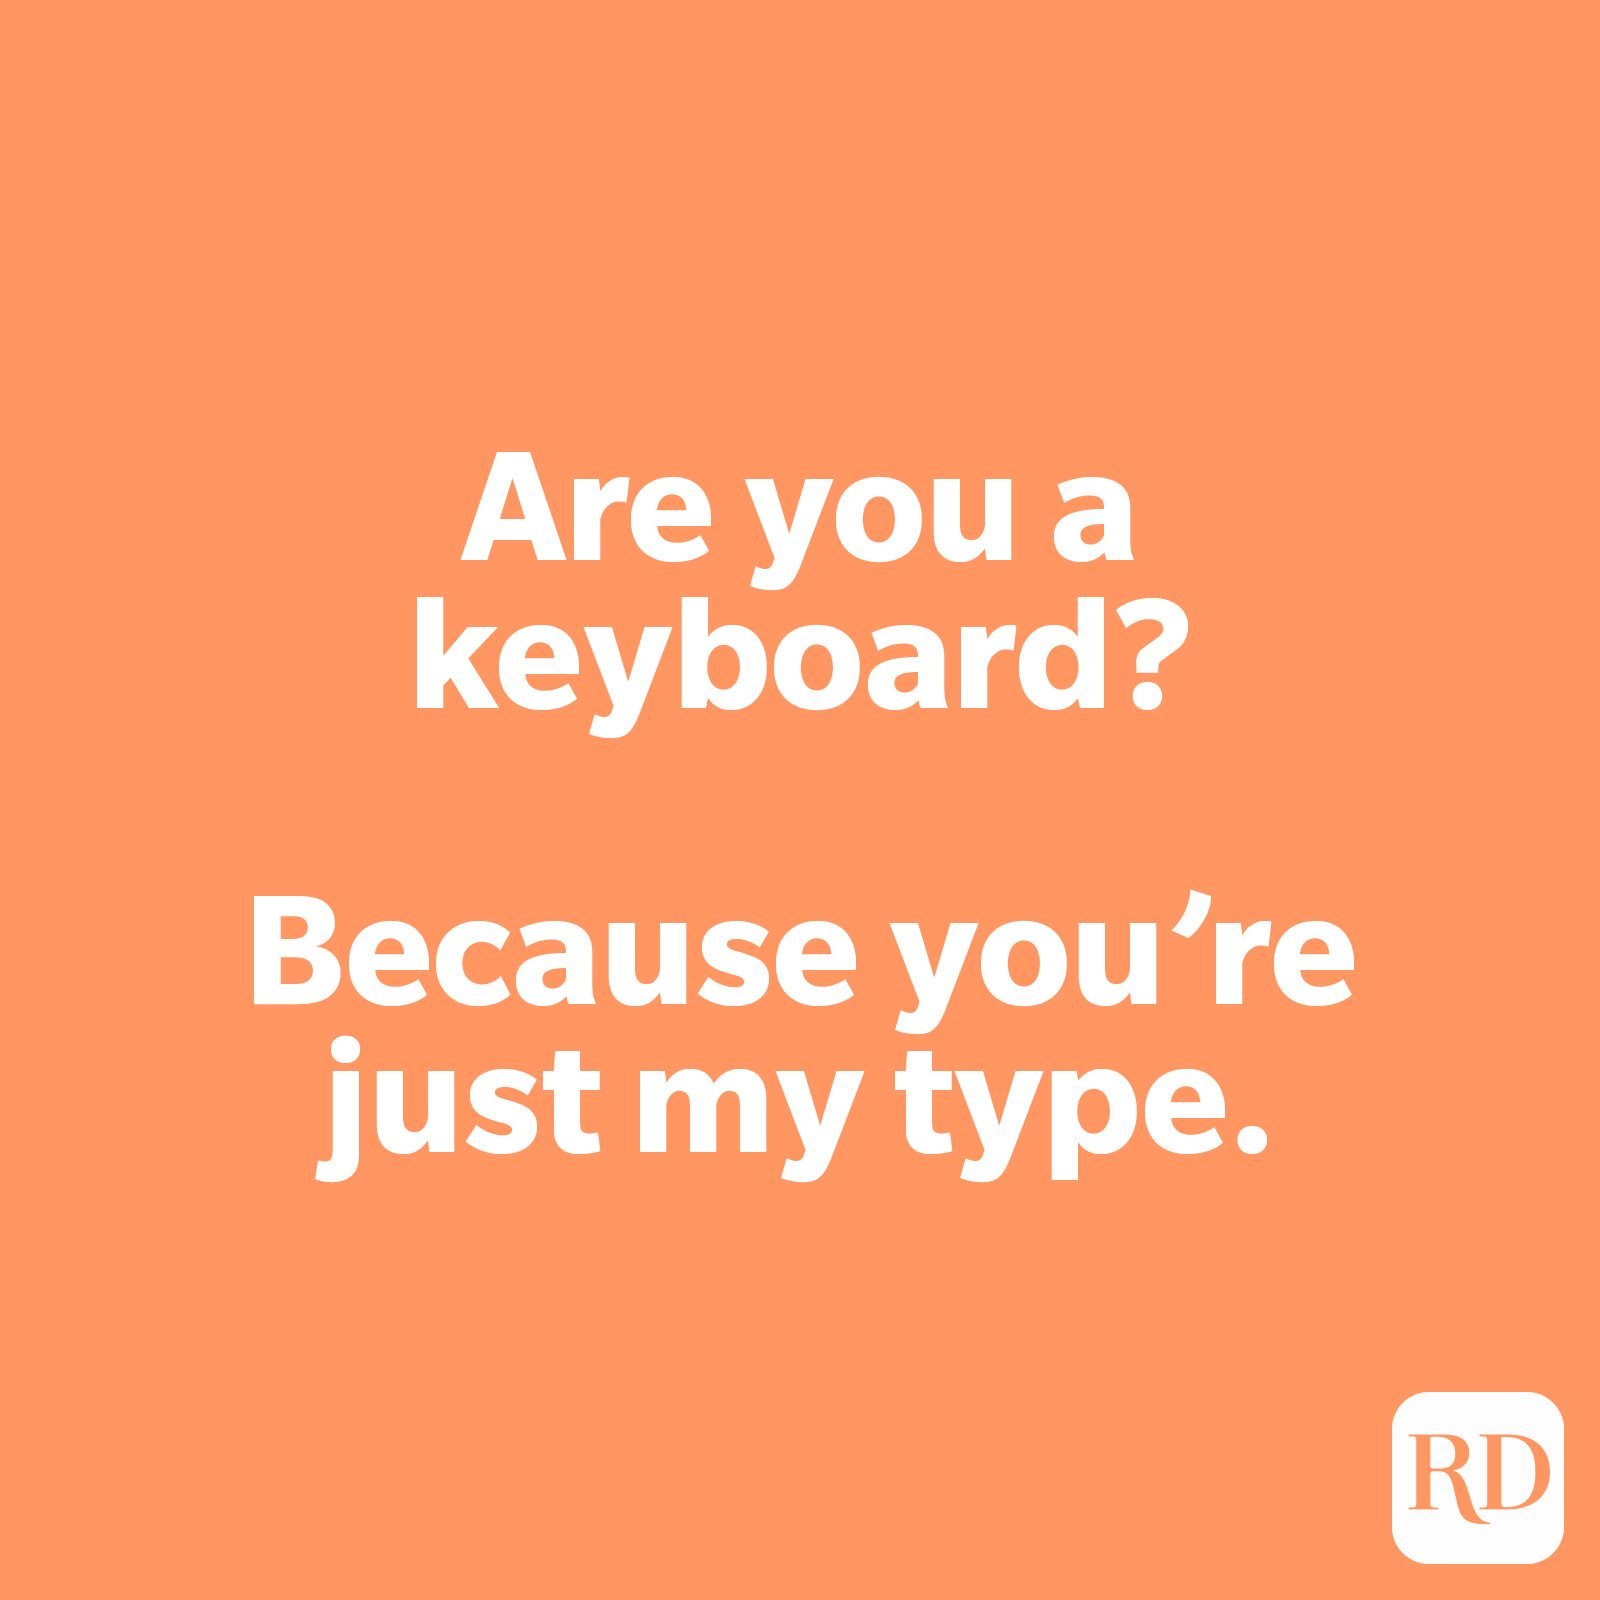 Are you a keyboard? Because you’re just my type.